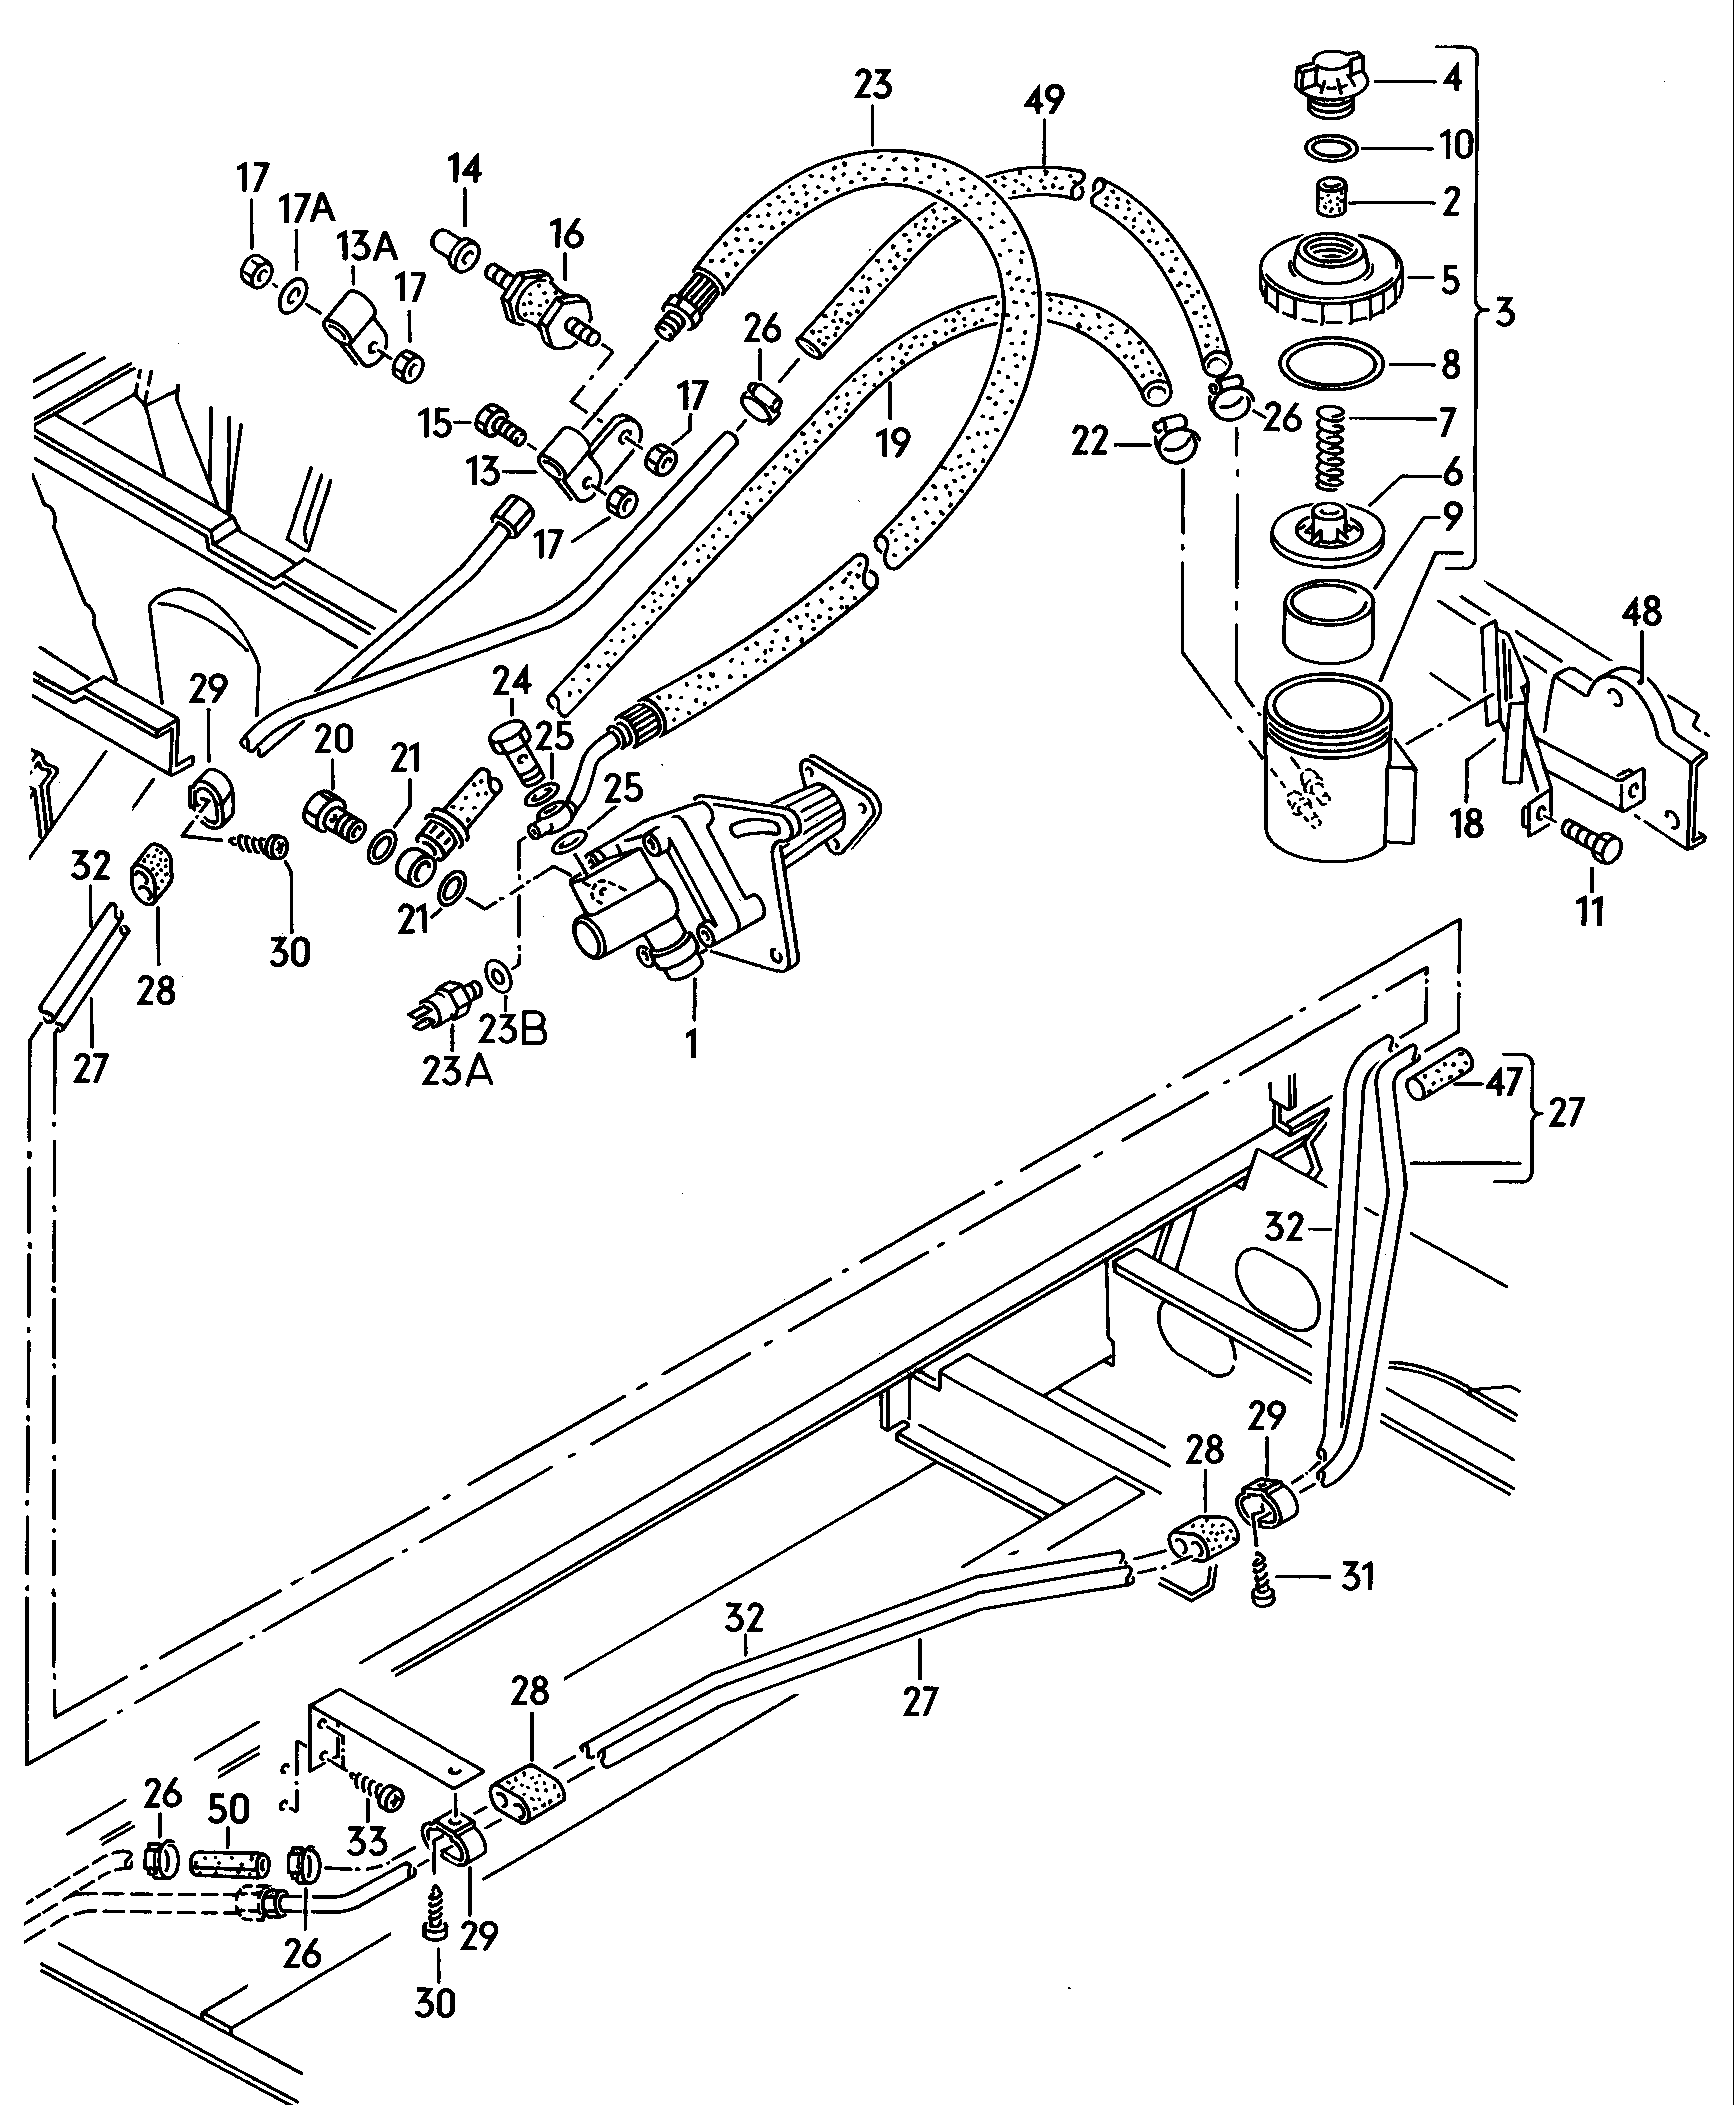 hydraulic system and fluid<br>container with connect. piecesfor power steering  - Typ 2/syncro - t2